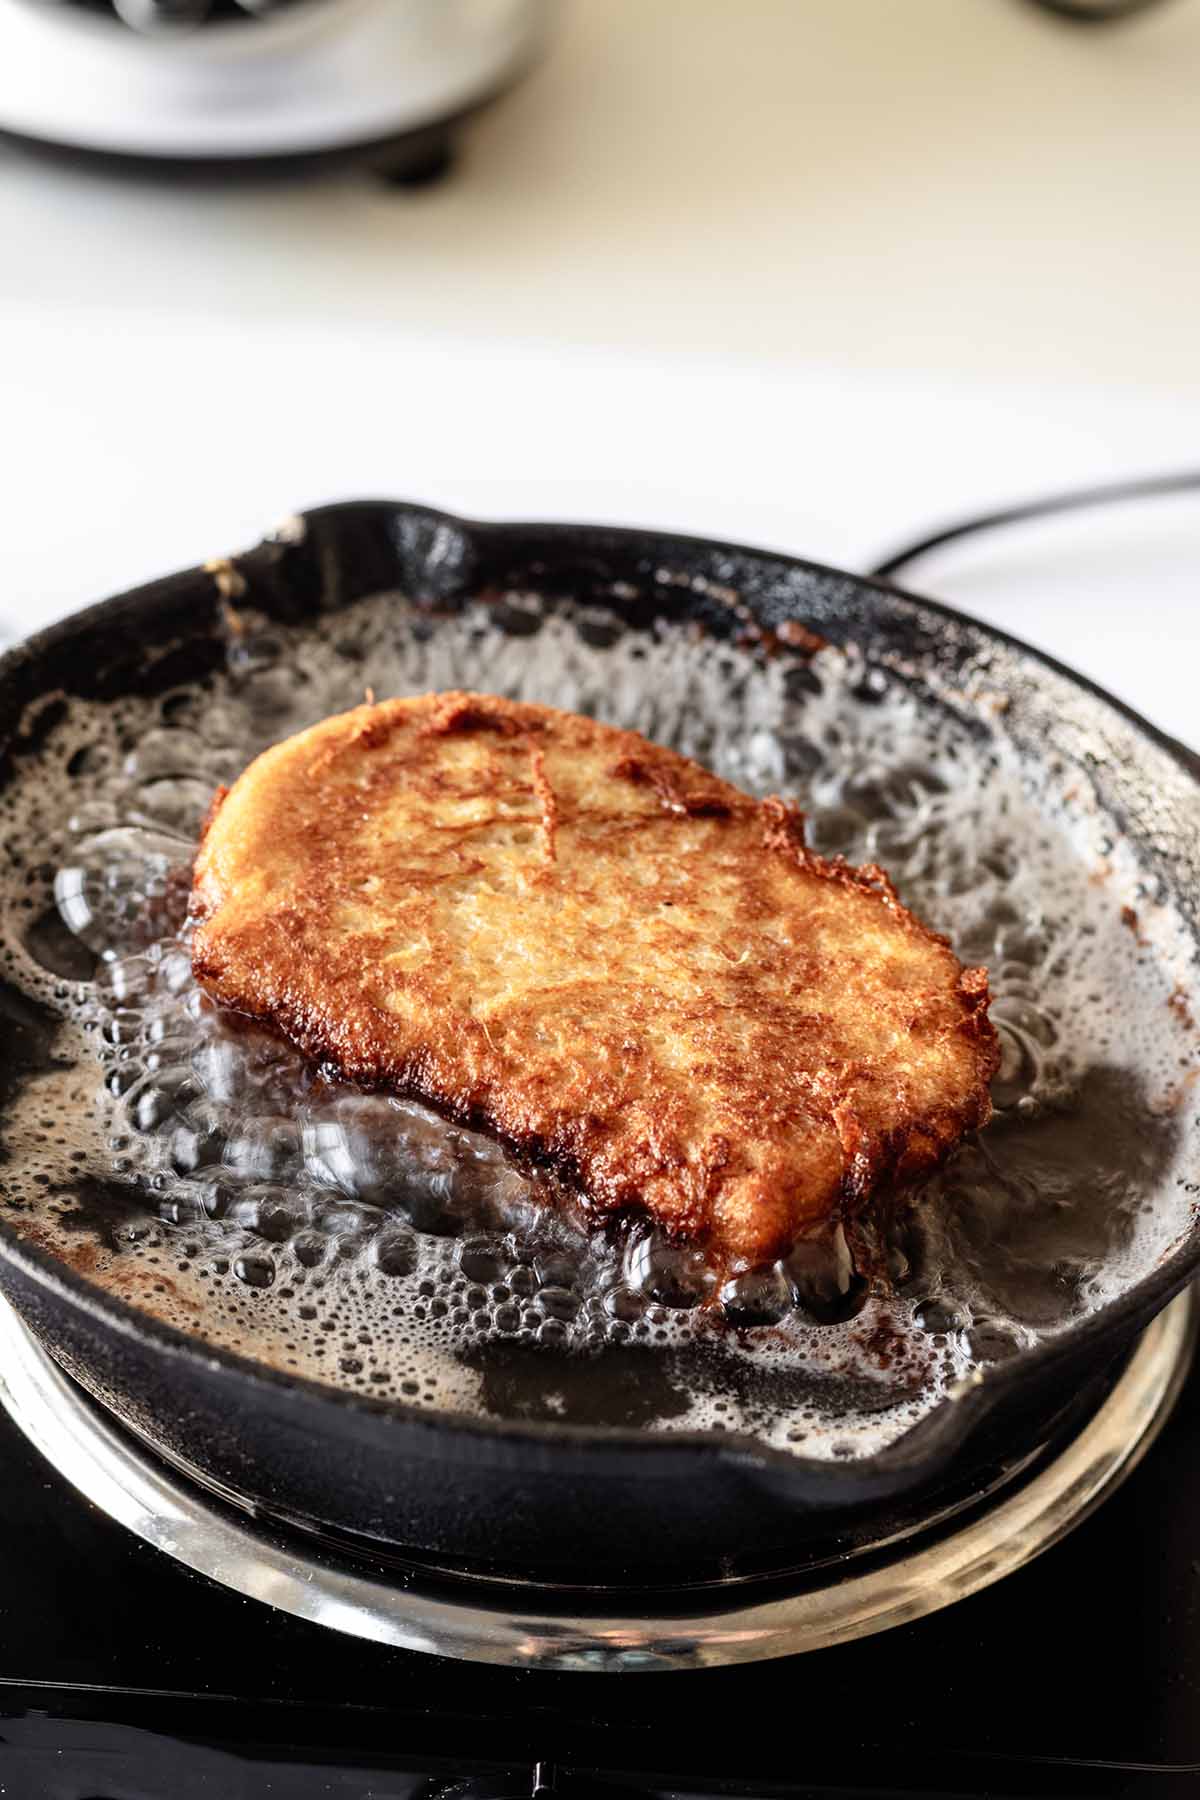 Stuffed French toast cooking in hot oil in a cast iron skillet